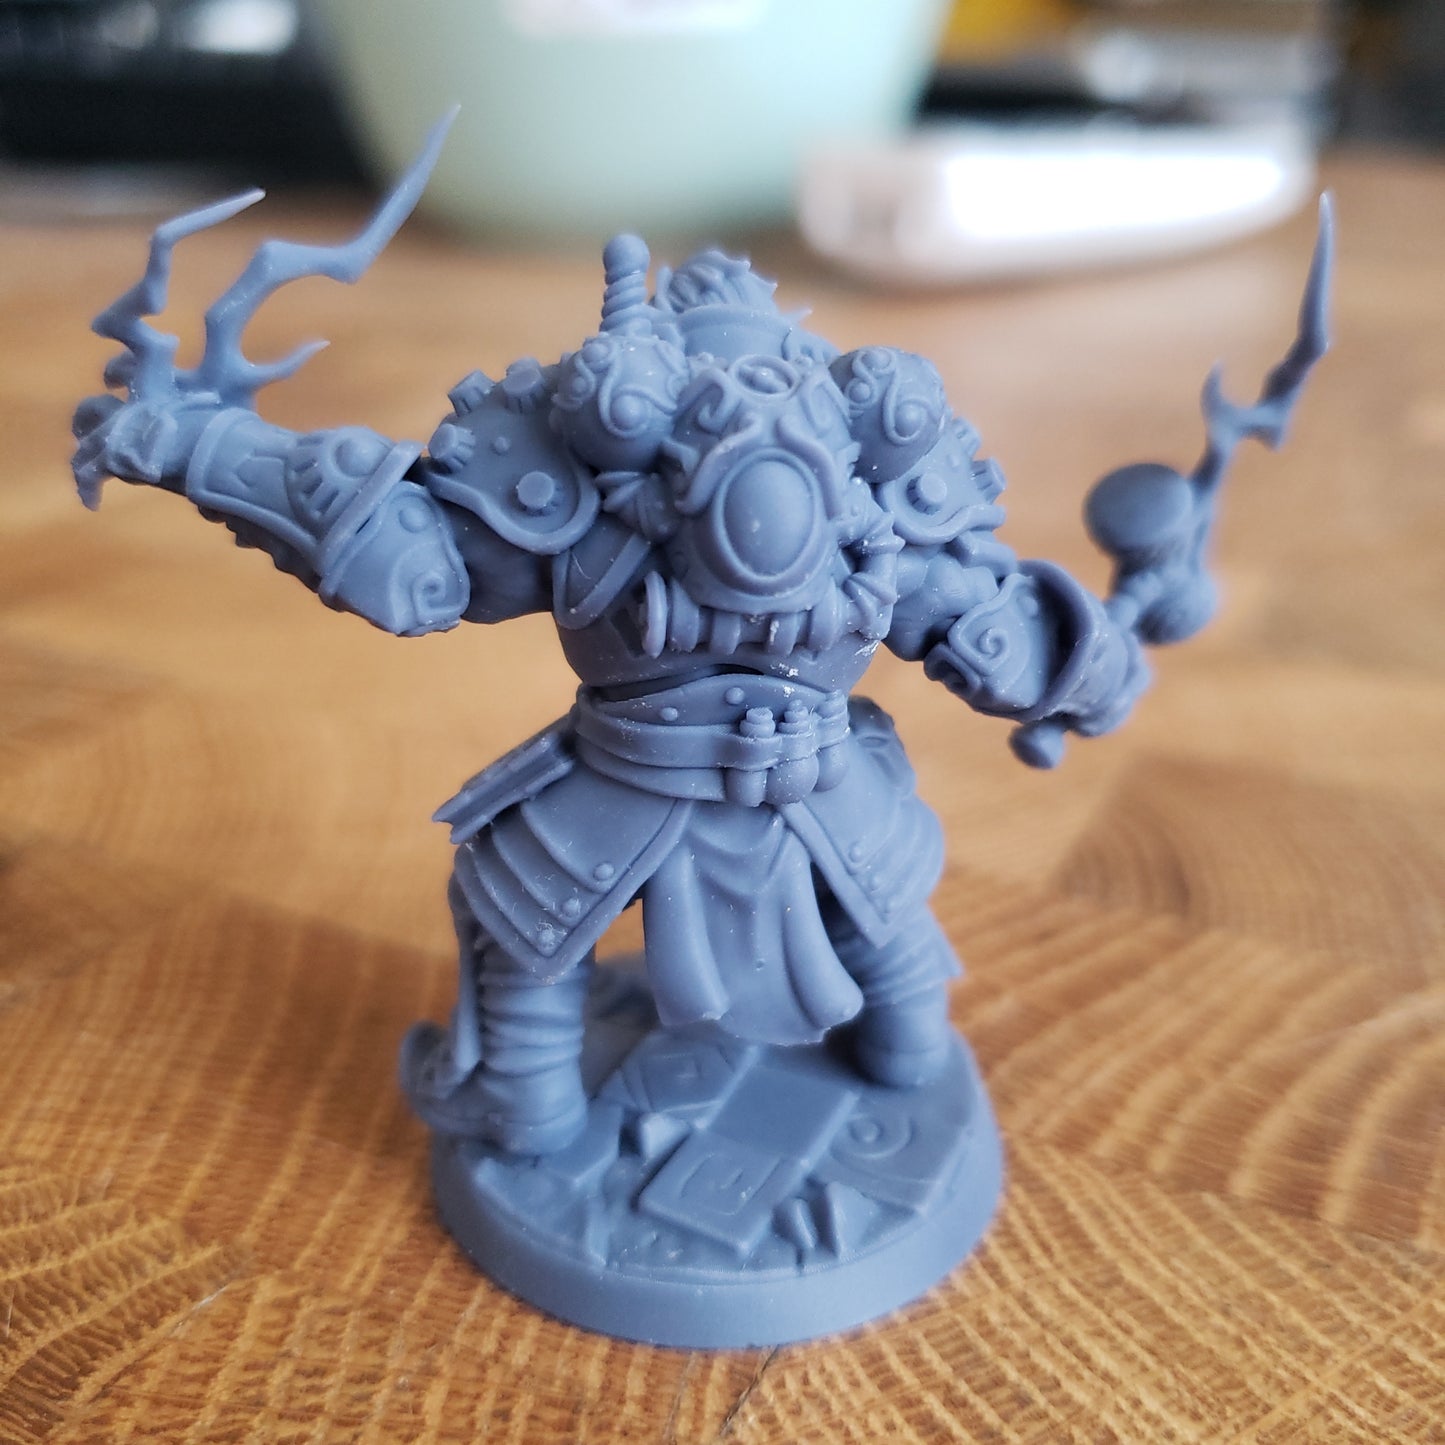 Image shows an example of a 3D printed bugbear sorcerer gaming miniature printed in-house at All Systems Go